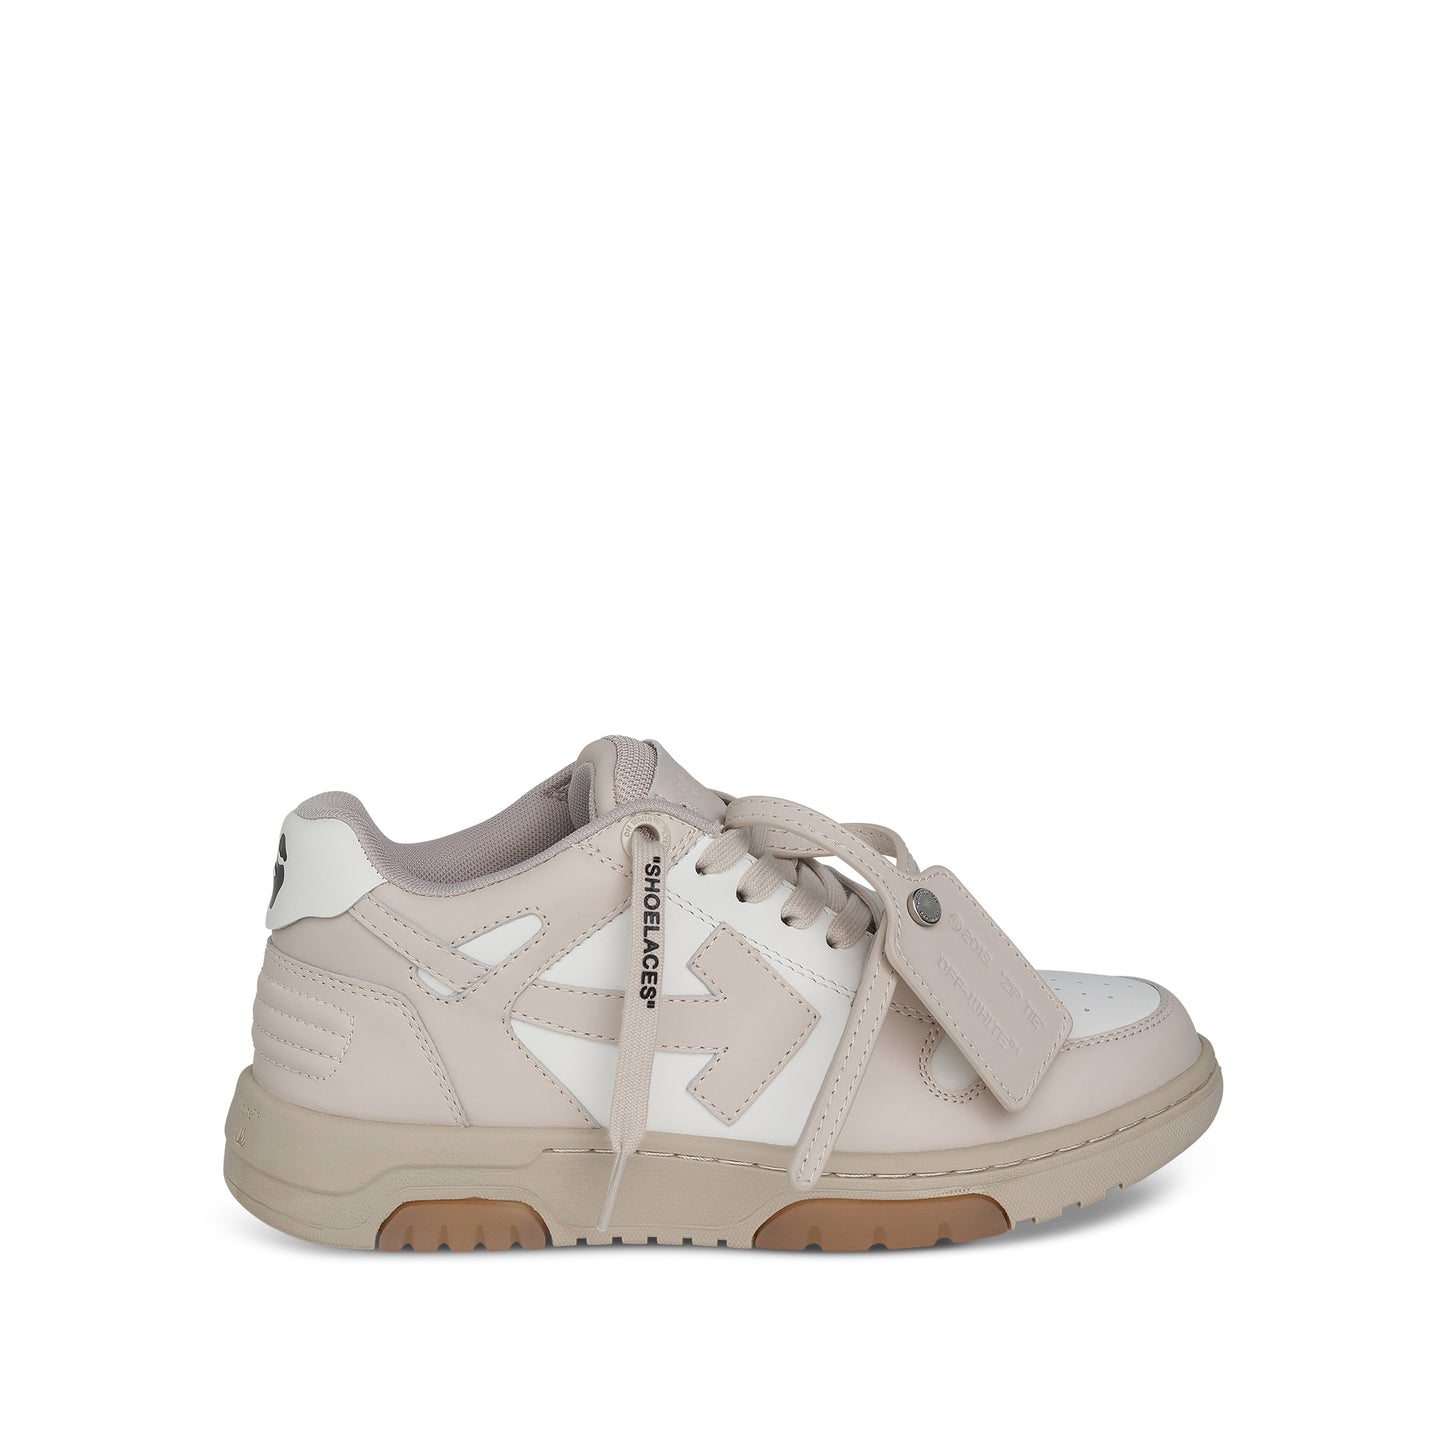 Out Of Office Calf Leather Sneaker in Off White/Beige